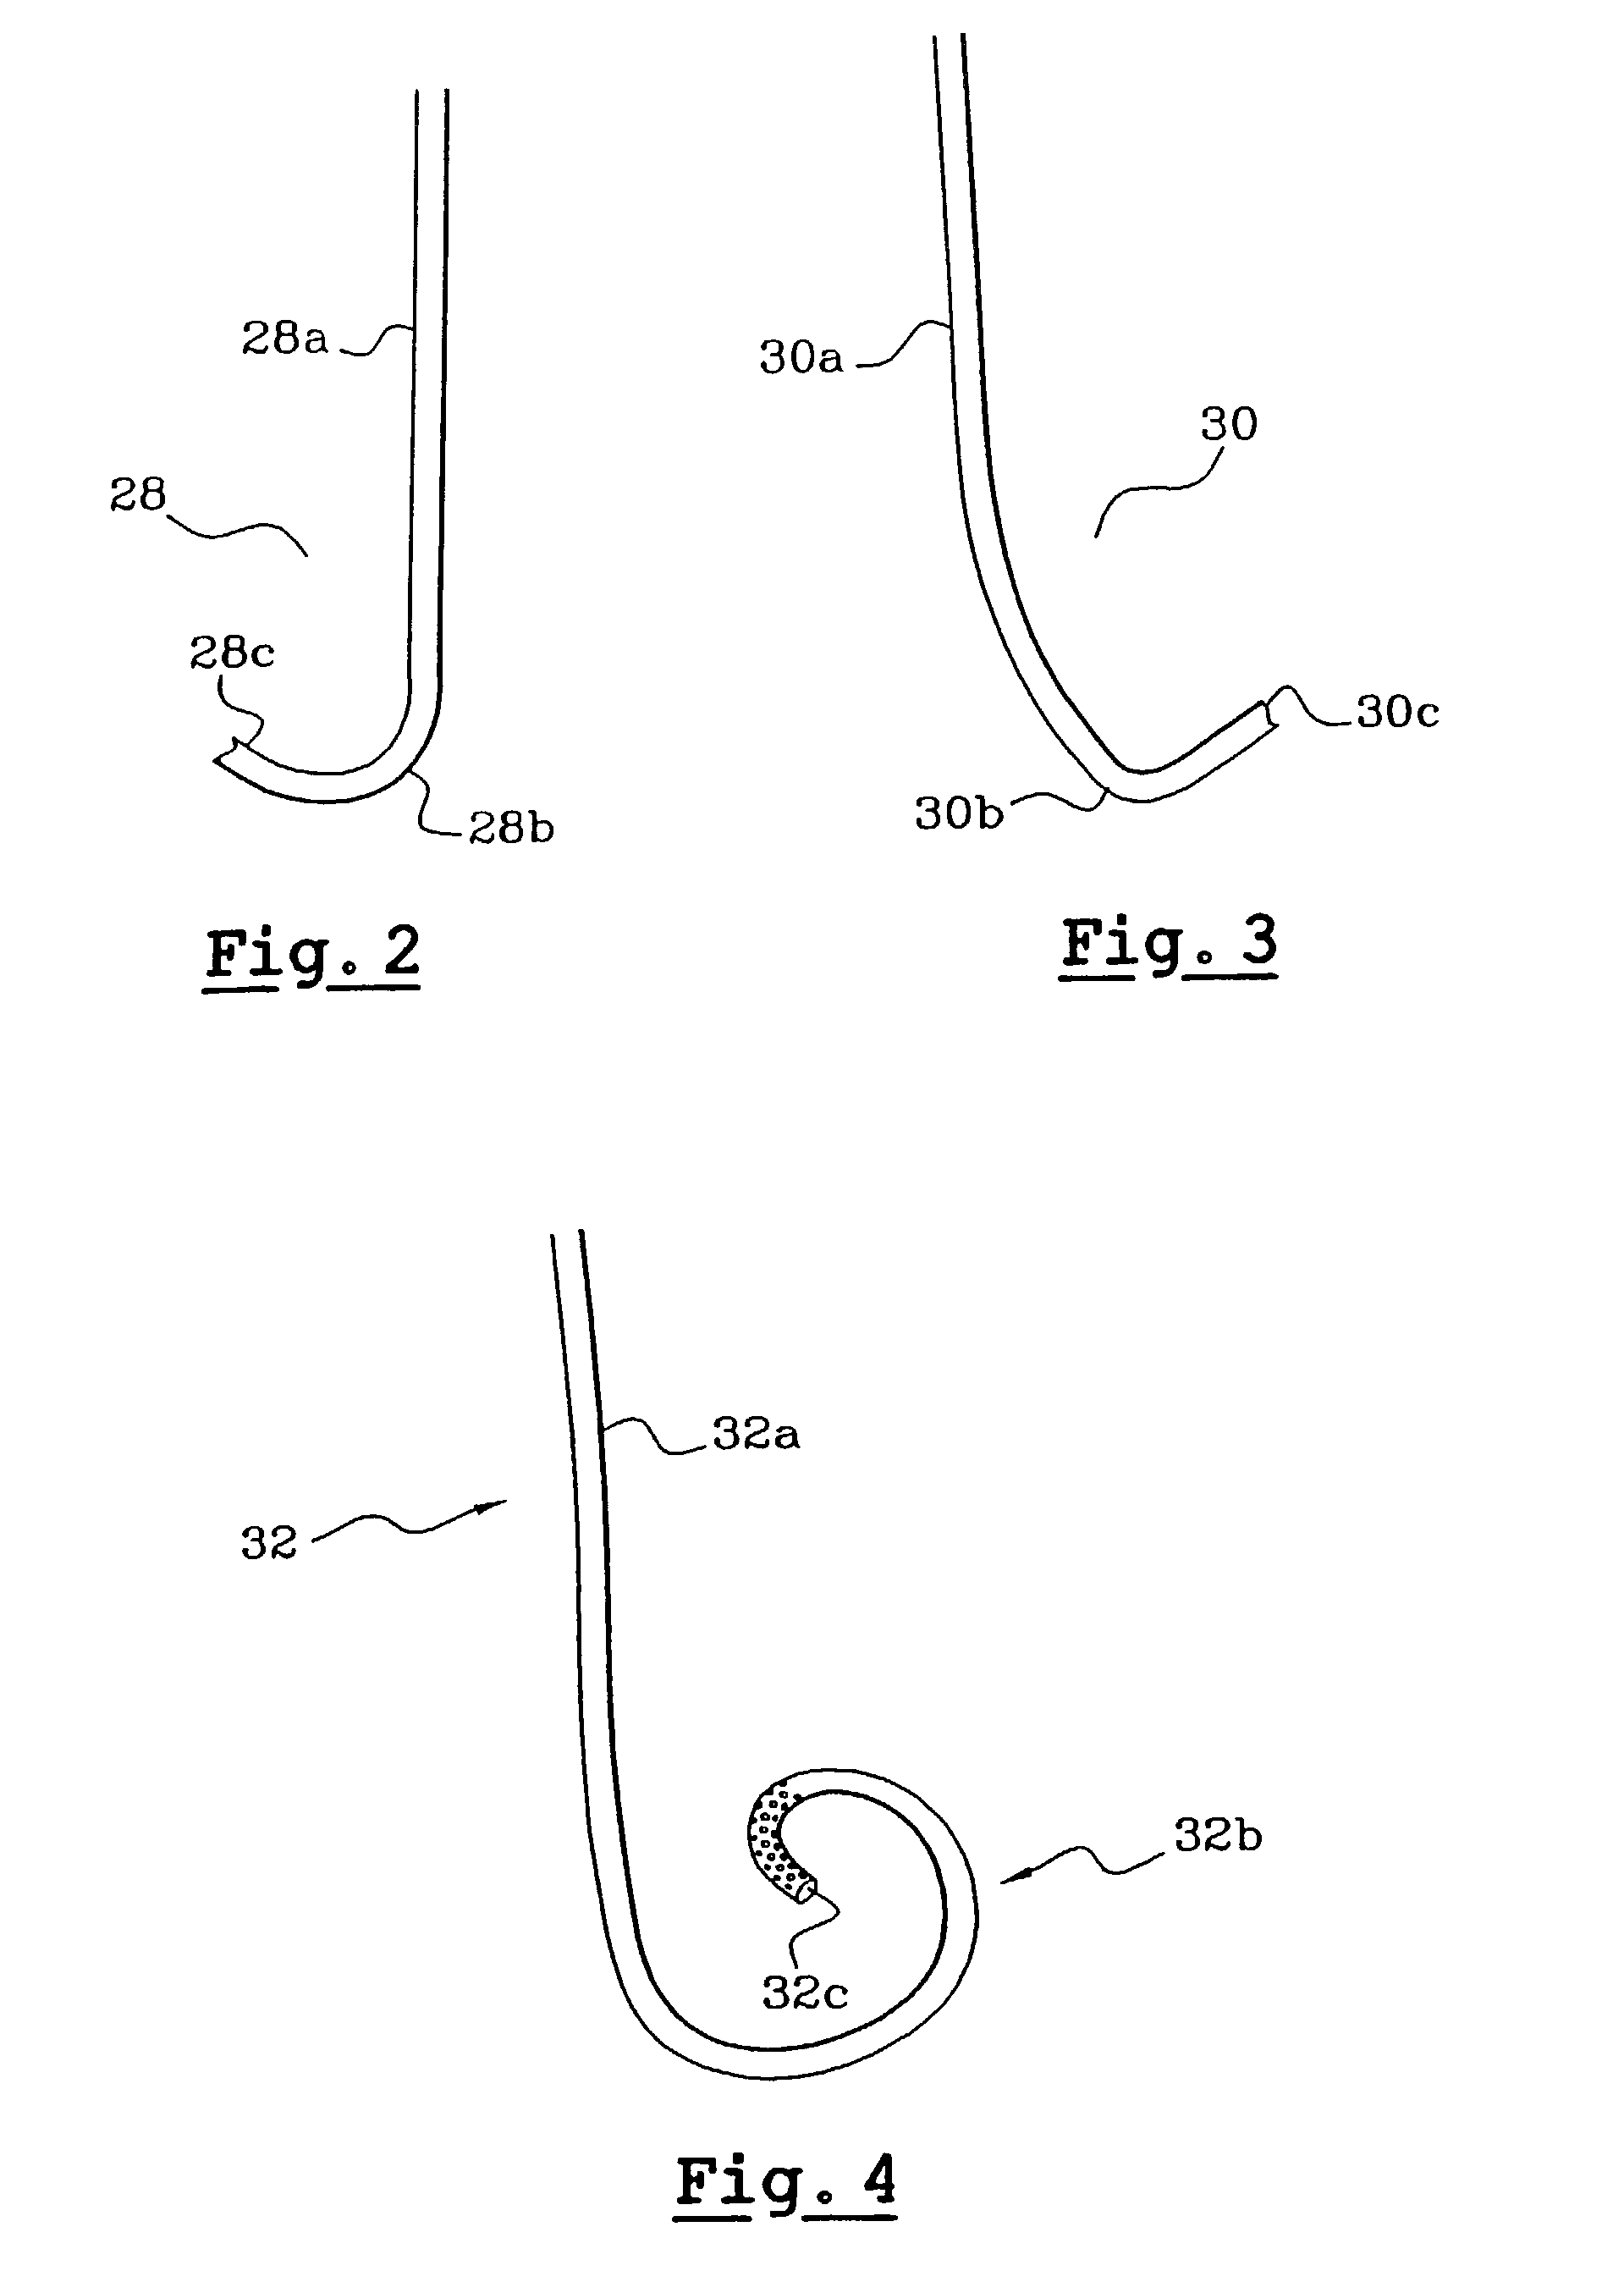 Method and apparatus for cardiac radiological examination in coronary angiography